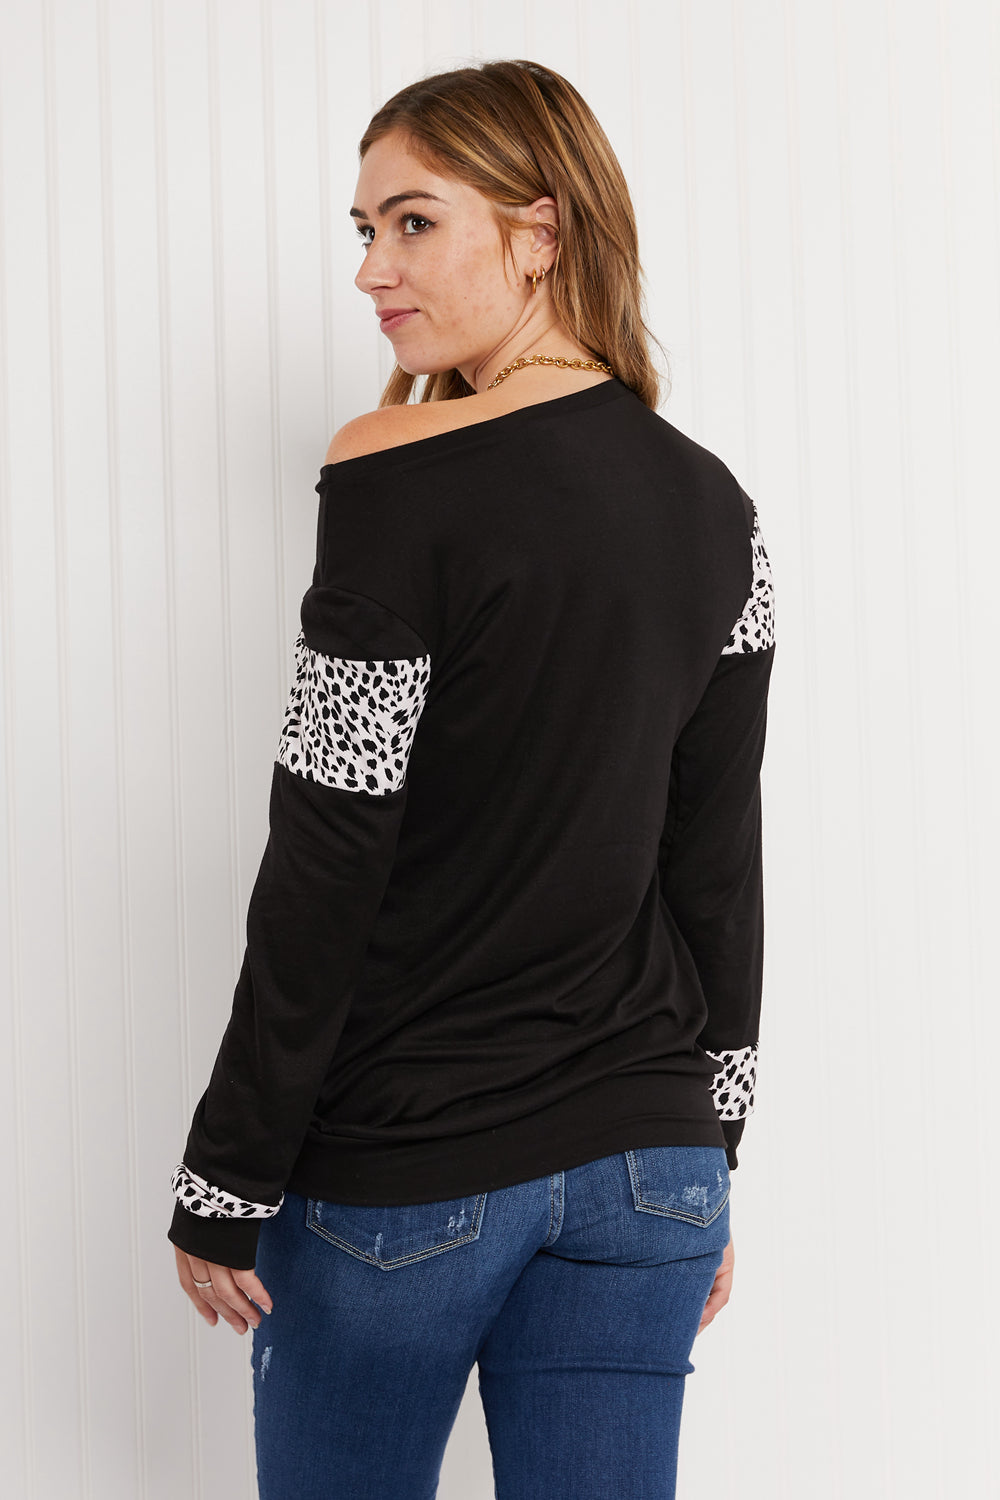 Acting Pro Wild for the Weekend Full Size Leopard Contrast Top